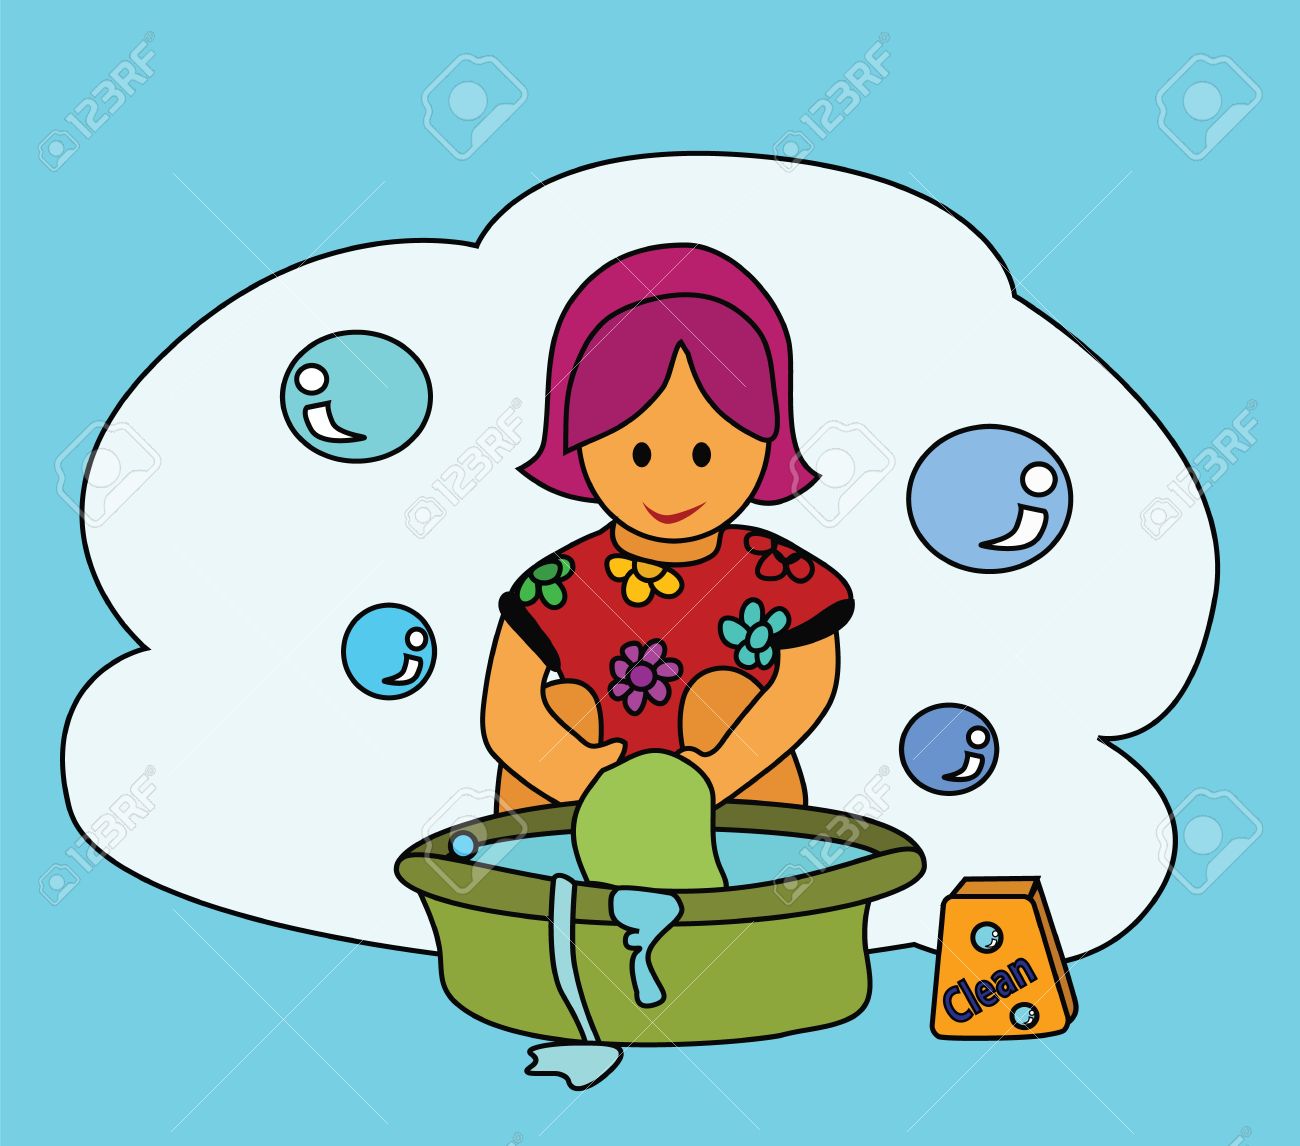 Uses of water for washing clothes clipart